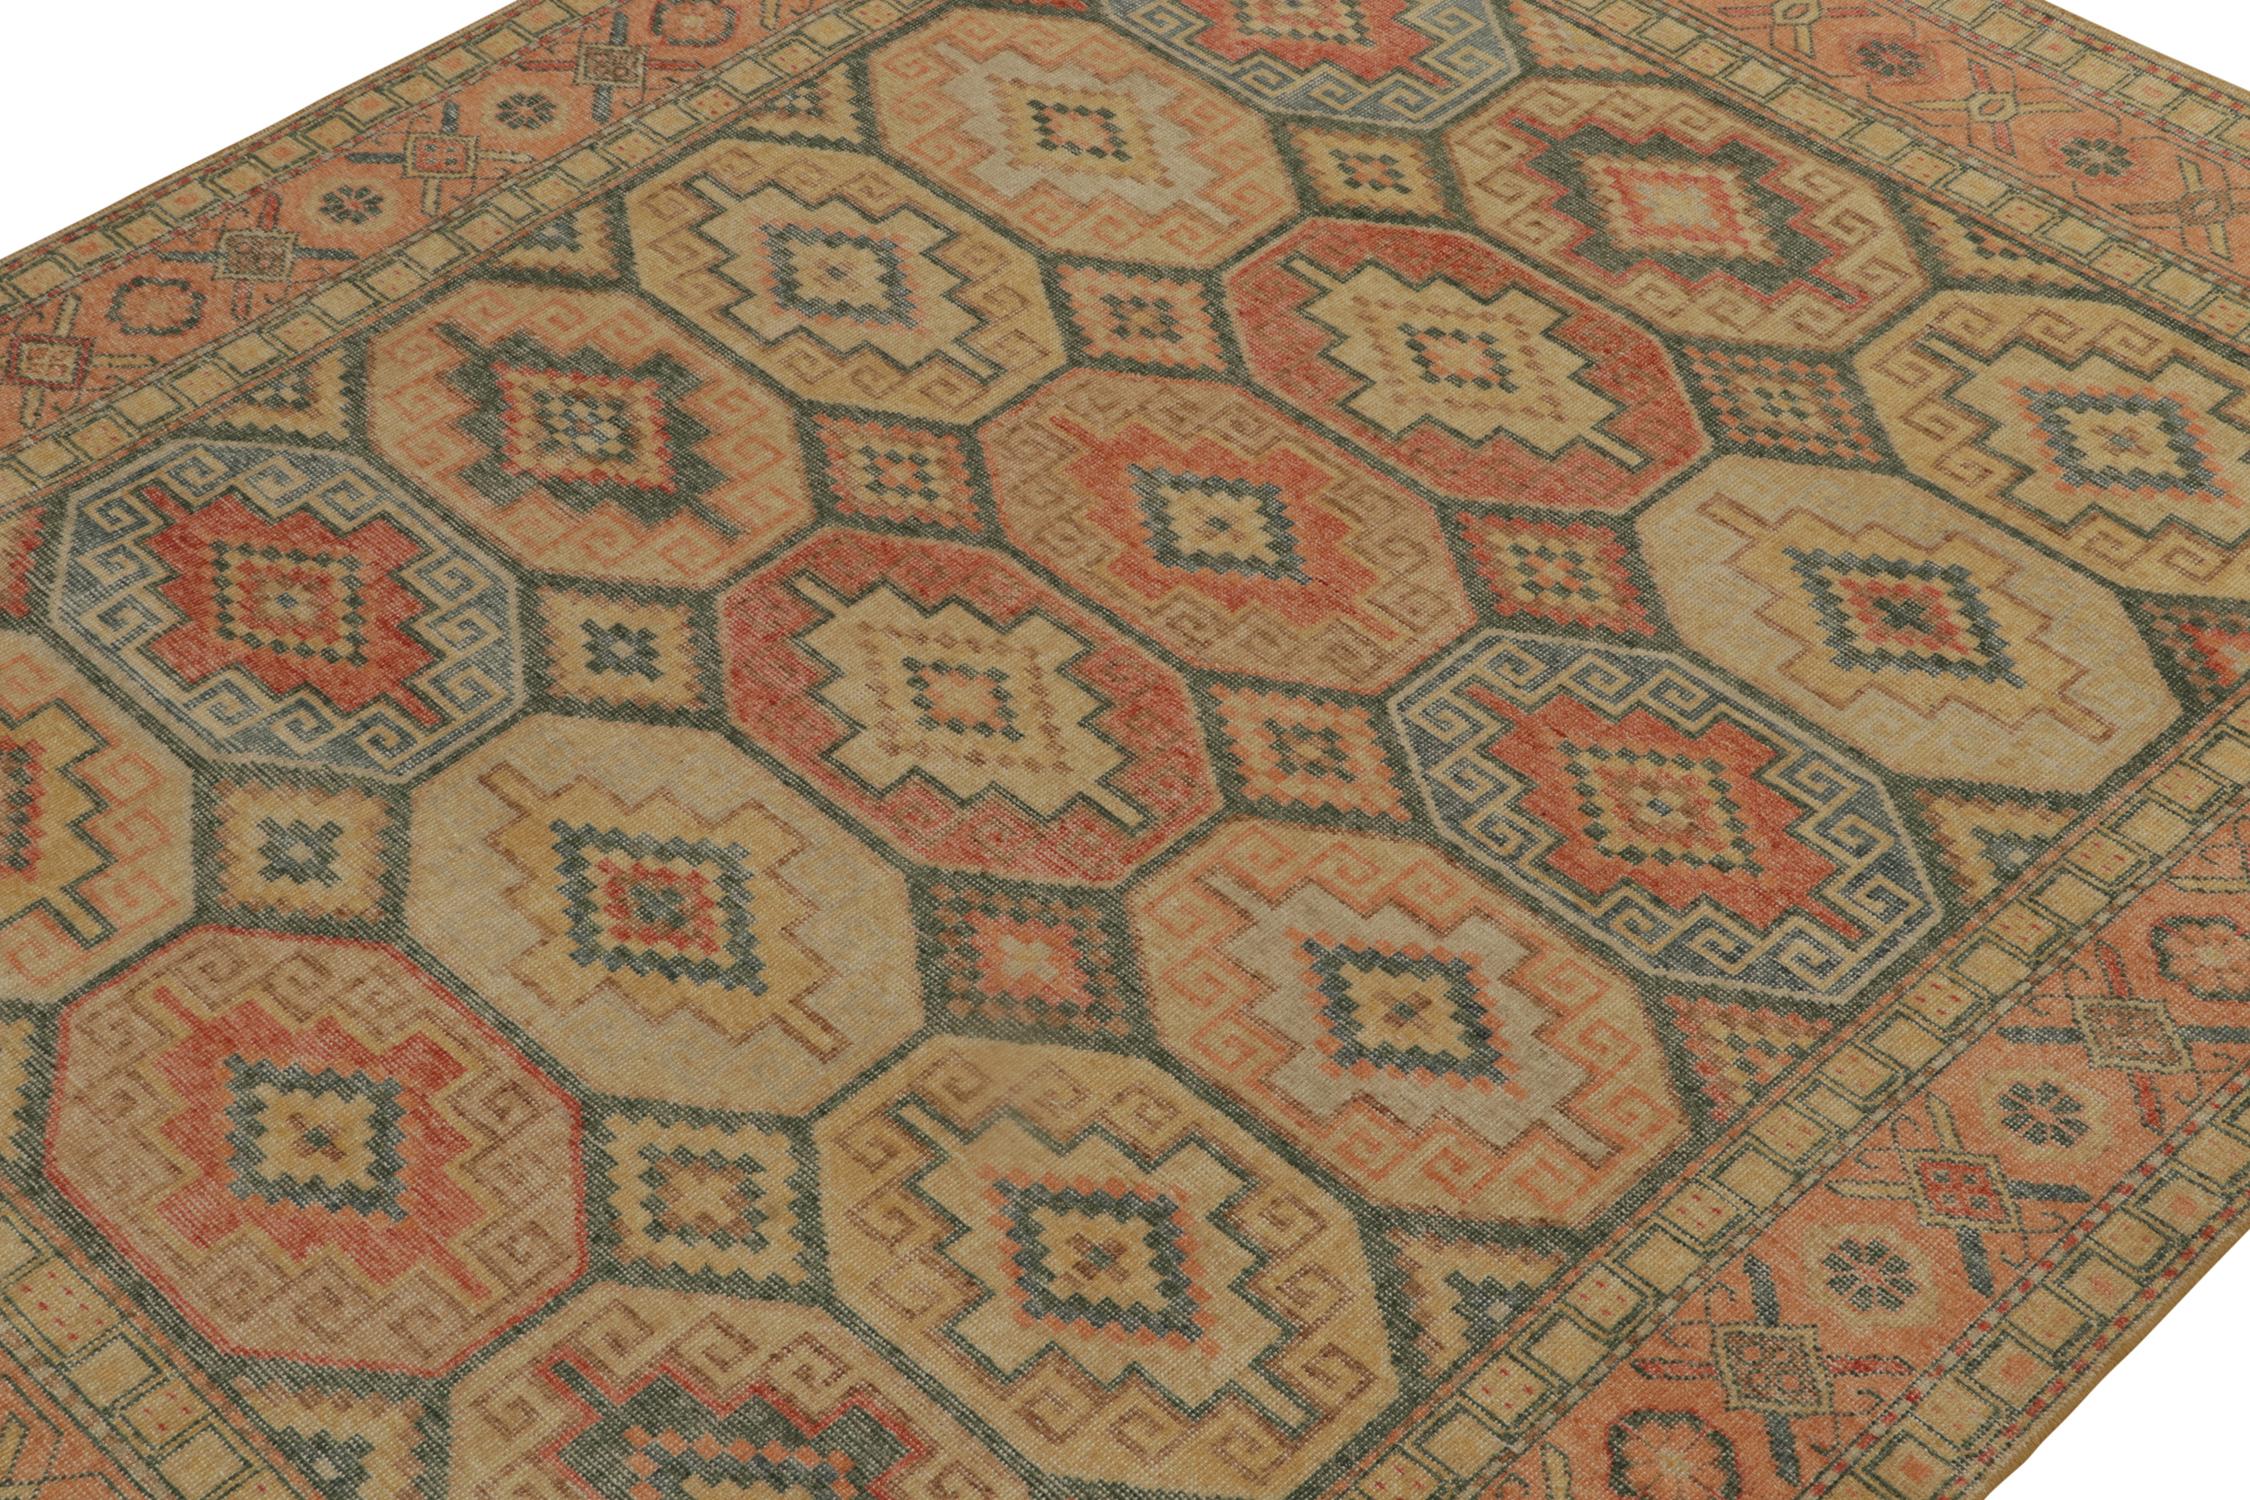 Indian Rug & Kilim’s Distressed Persian Style Rug in Orange, Beige and Blue Medallions For Sale